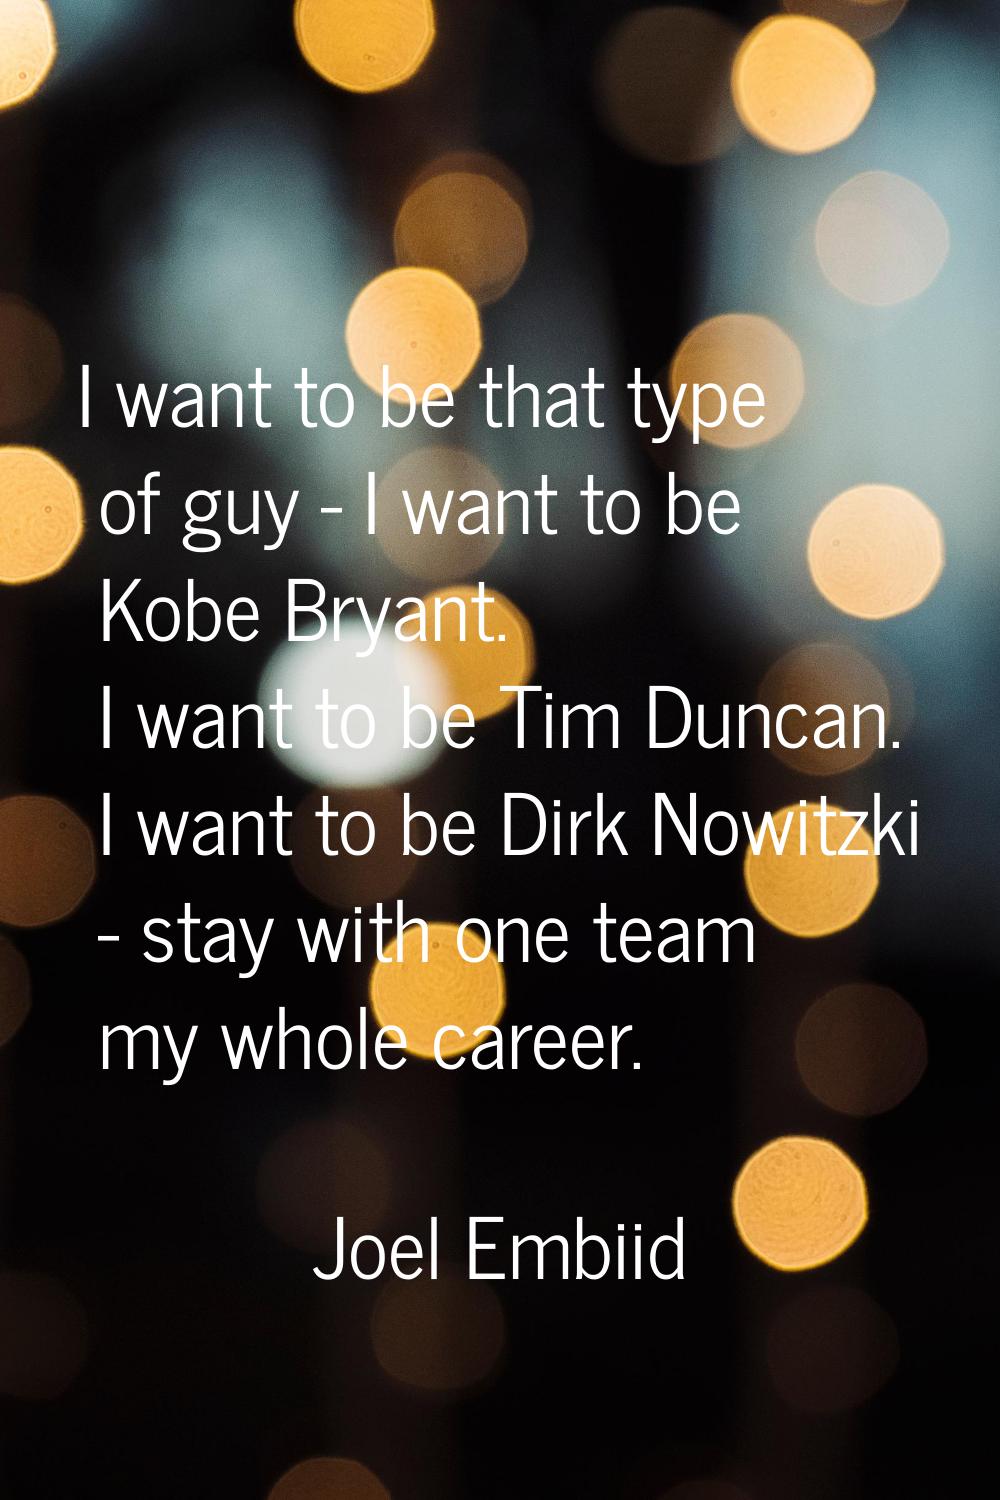 I want to be that type of guy - I want to be Kobe Bryant. I want to be Tim Duncan. I want to be Dir